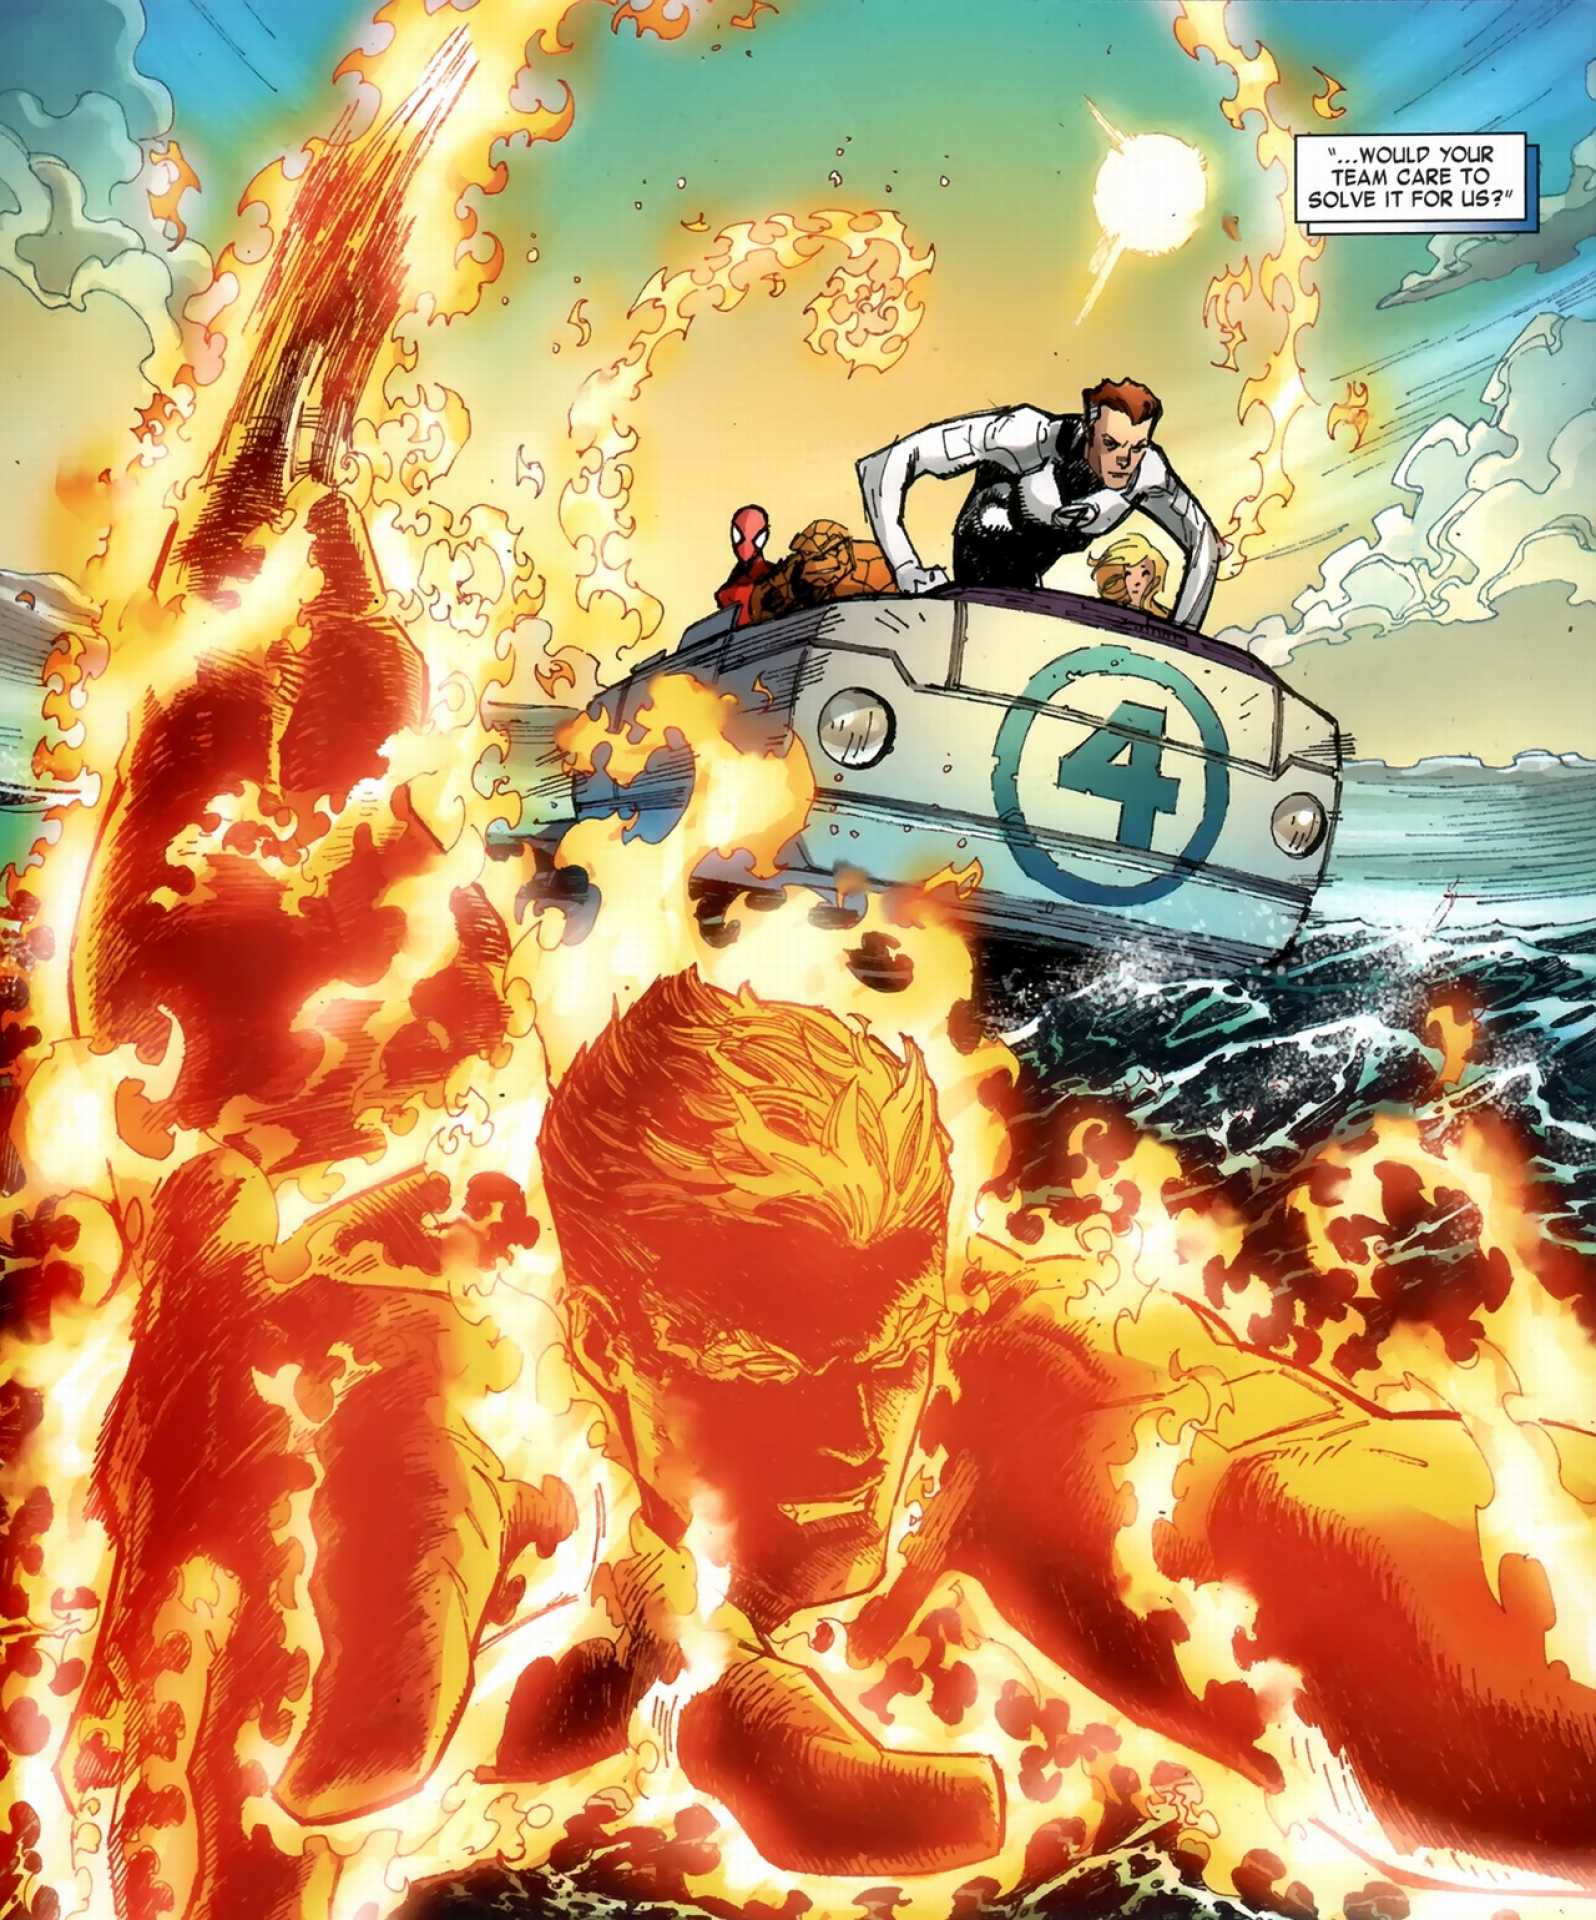 Batman defeats Human Torch Number 12: uses Hologram Projector to show a Hologram of Catwoman, while Human Torch stares cover his body in flame retardant dust